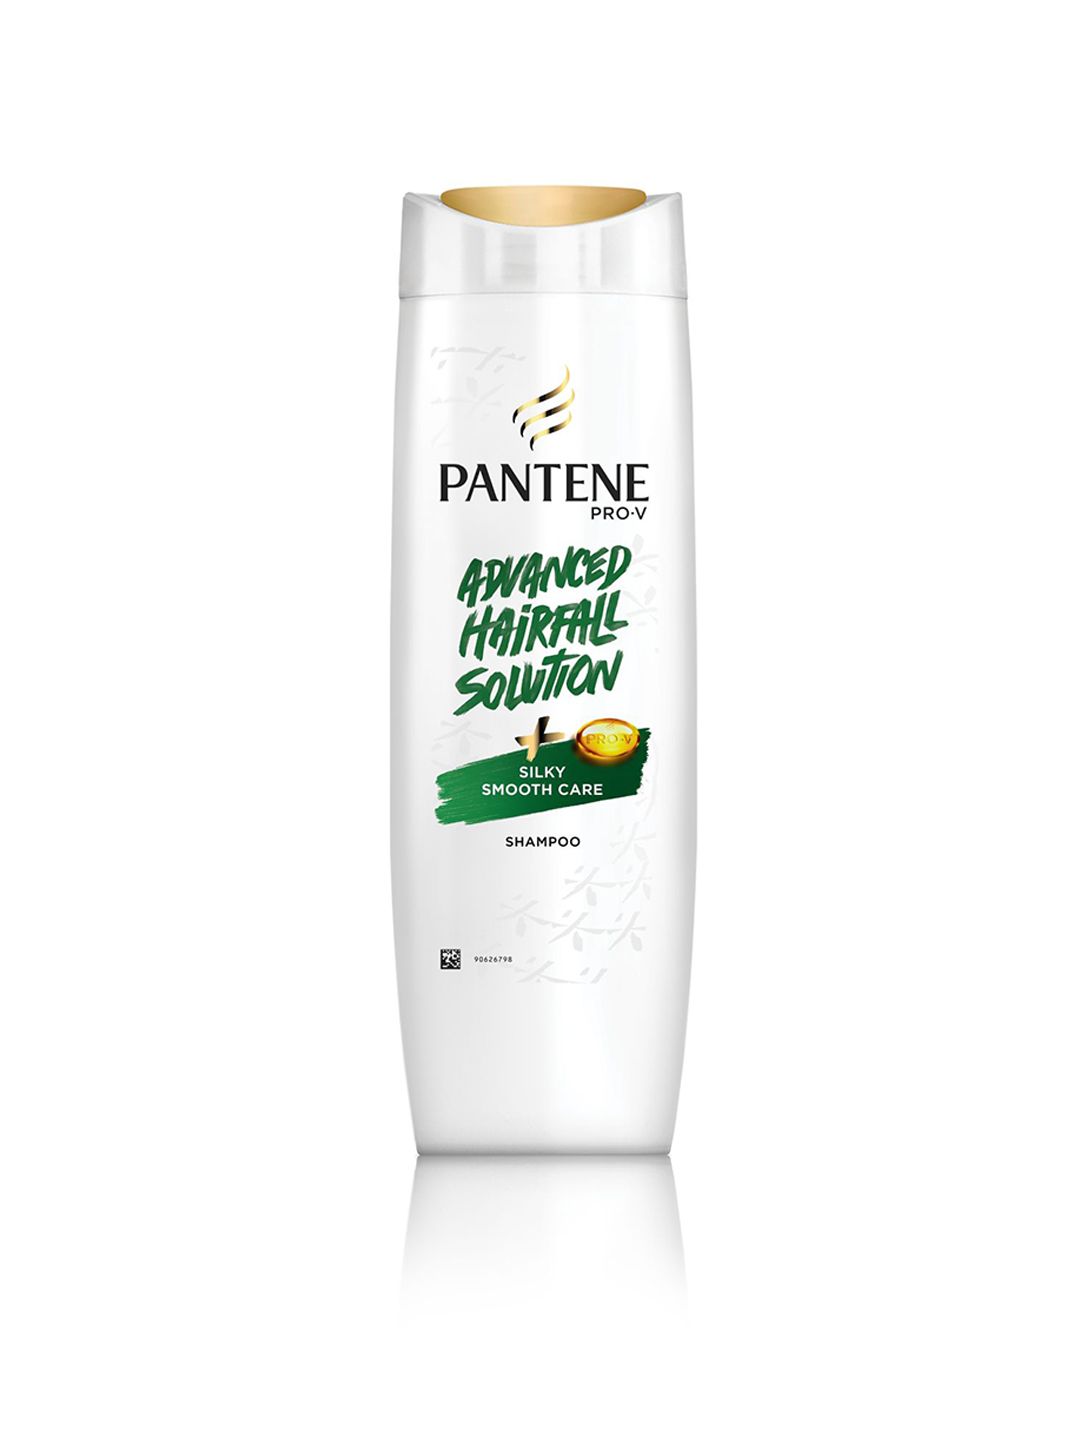 Pantene Advanced Hair Fall Solution Silky Smooth Care Shampoo 340 ml Price in India